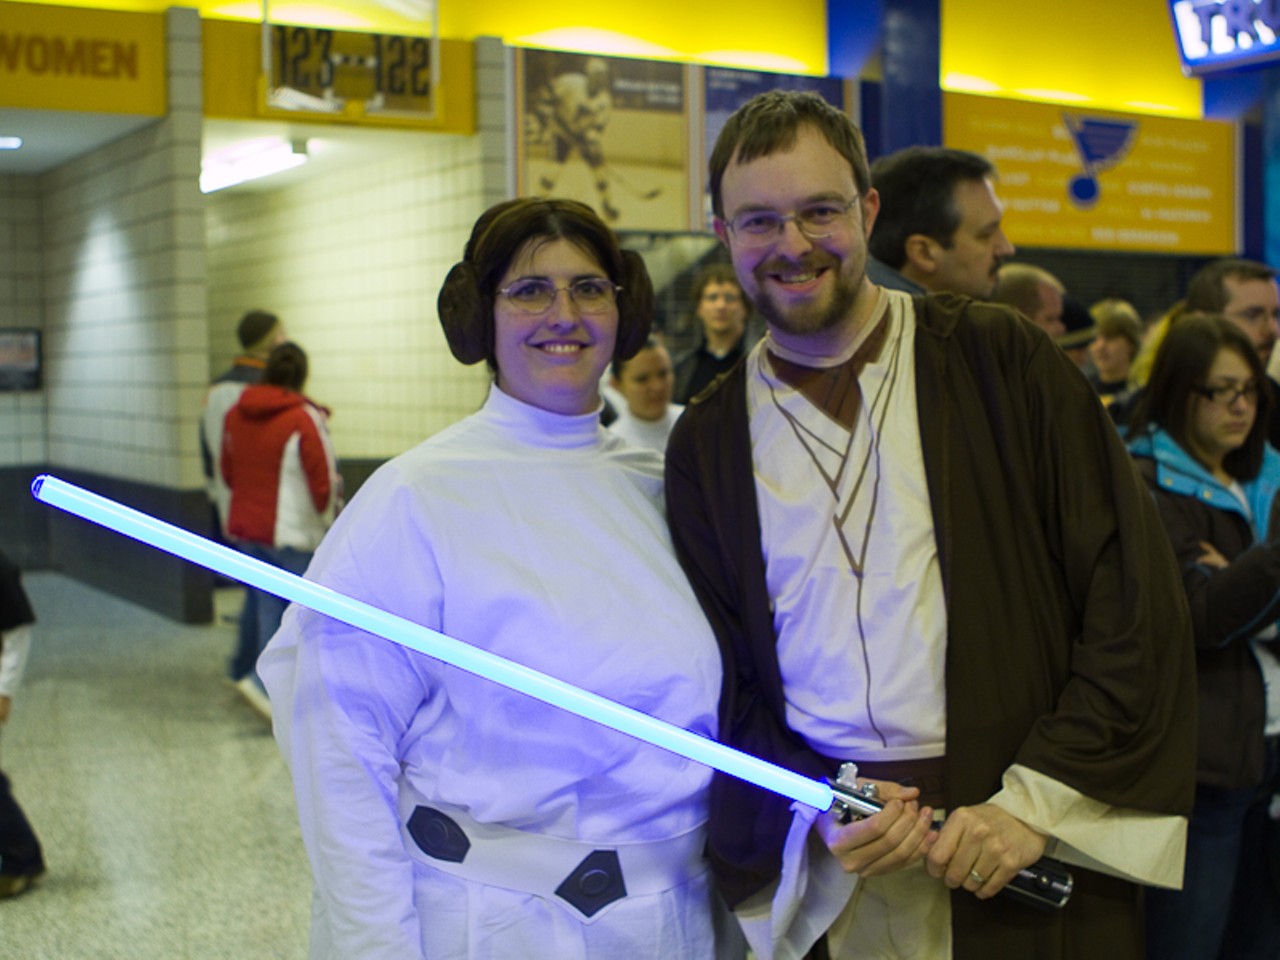 Grace and Ryan Cornett of Wentzville came out to enjoy their first Star Wars concert.